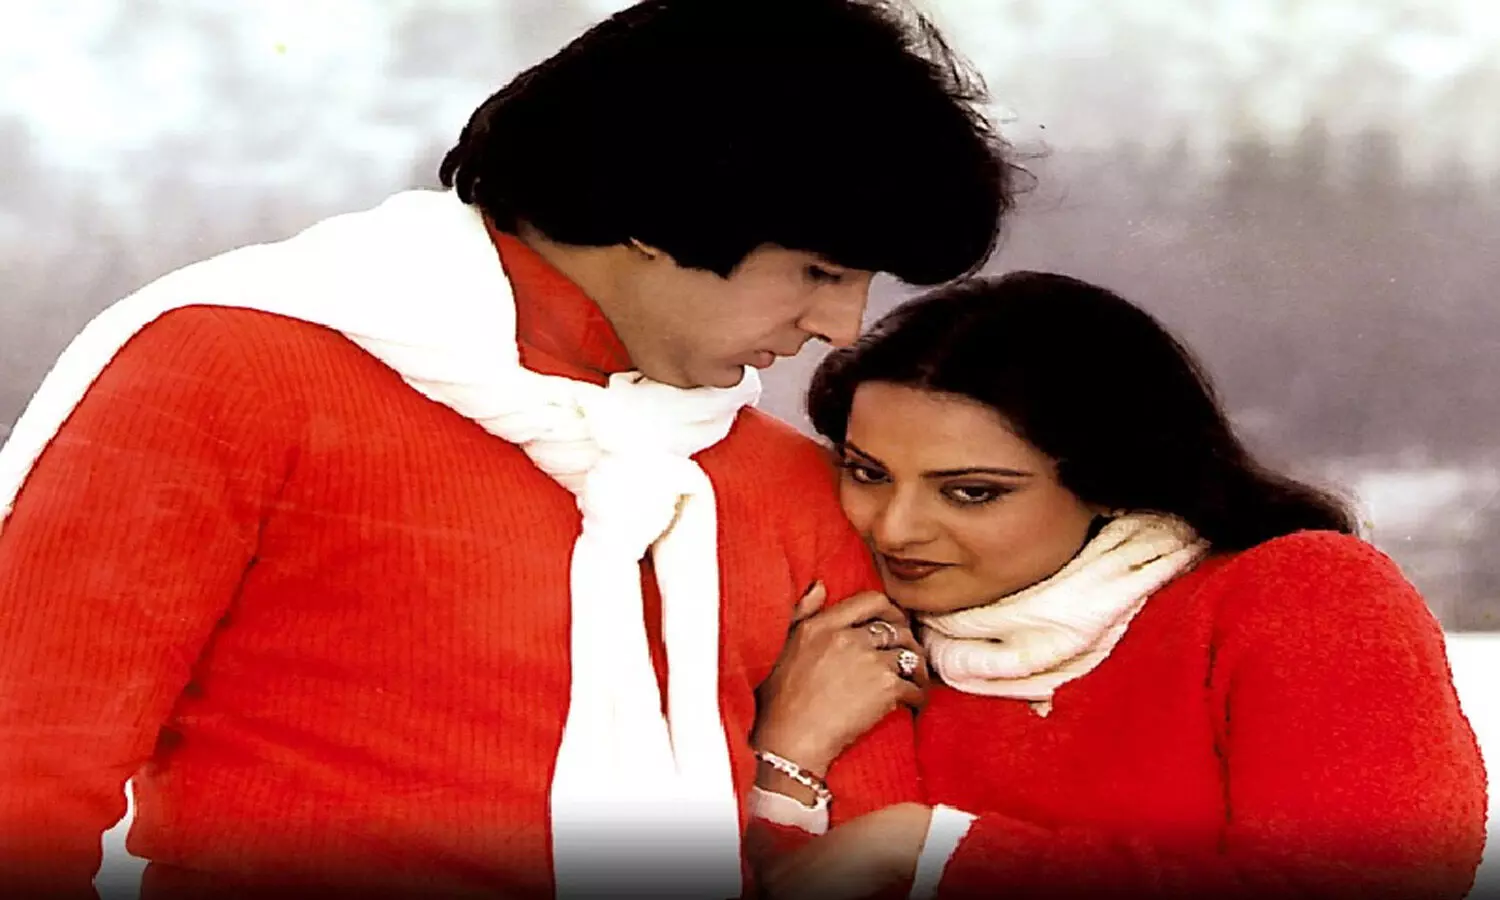 When Rekha said there was never a personal connection on her feelings for Amitabh Bachchan